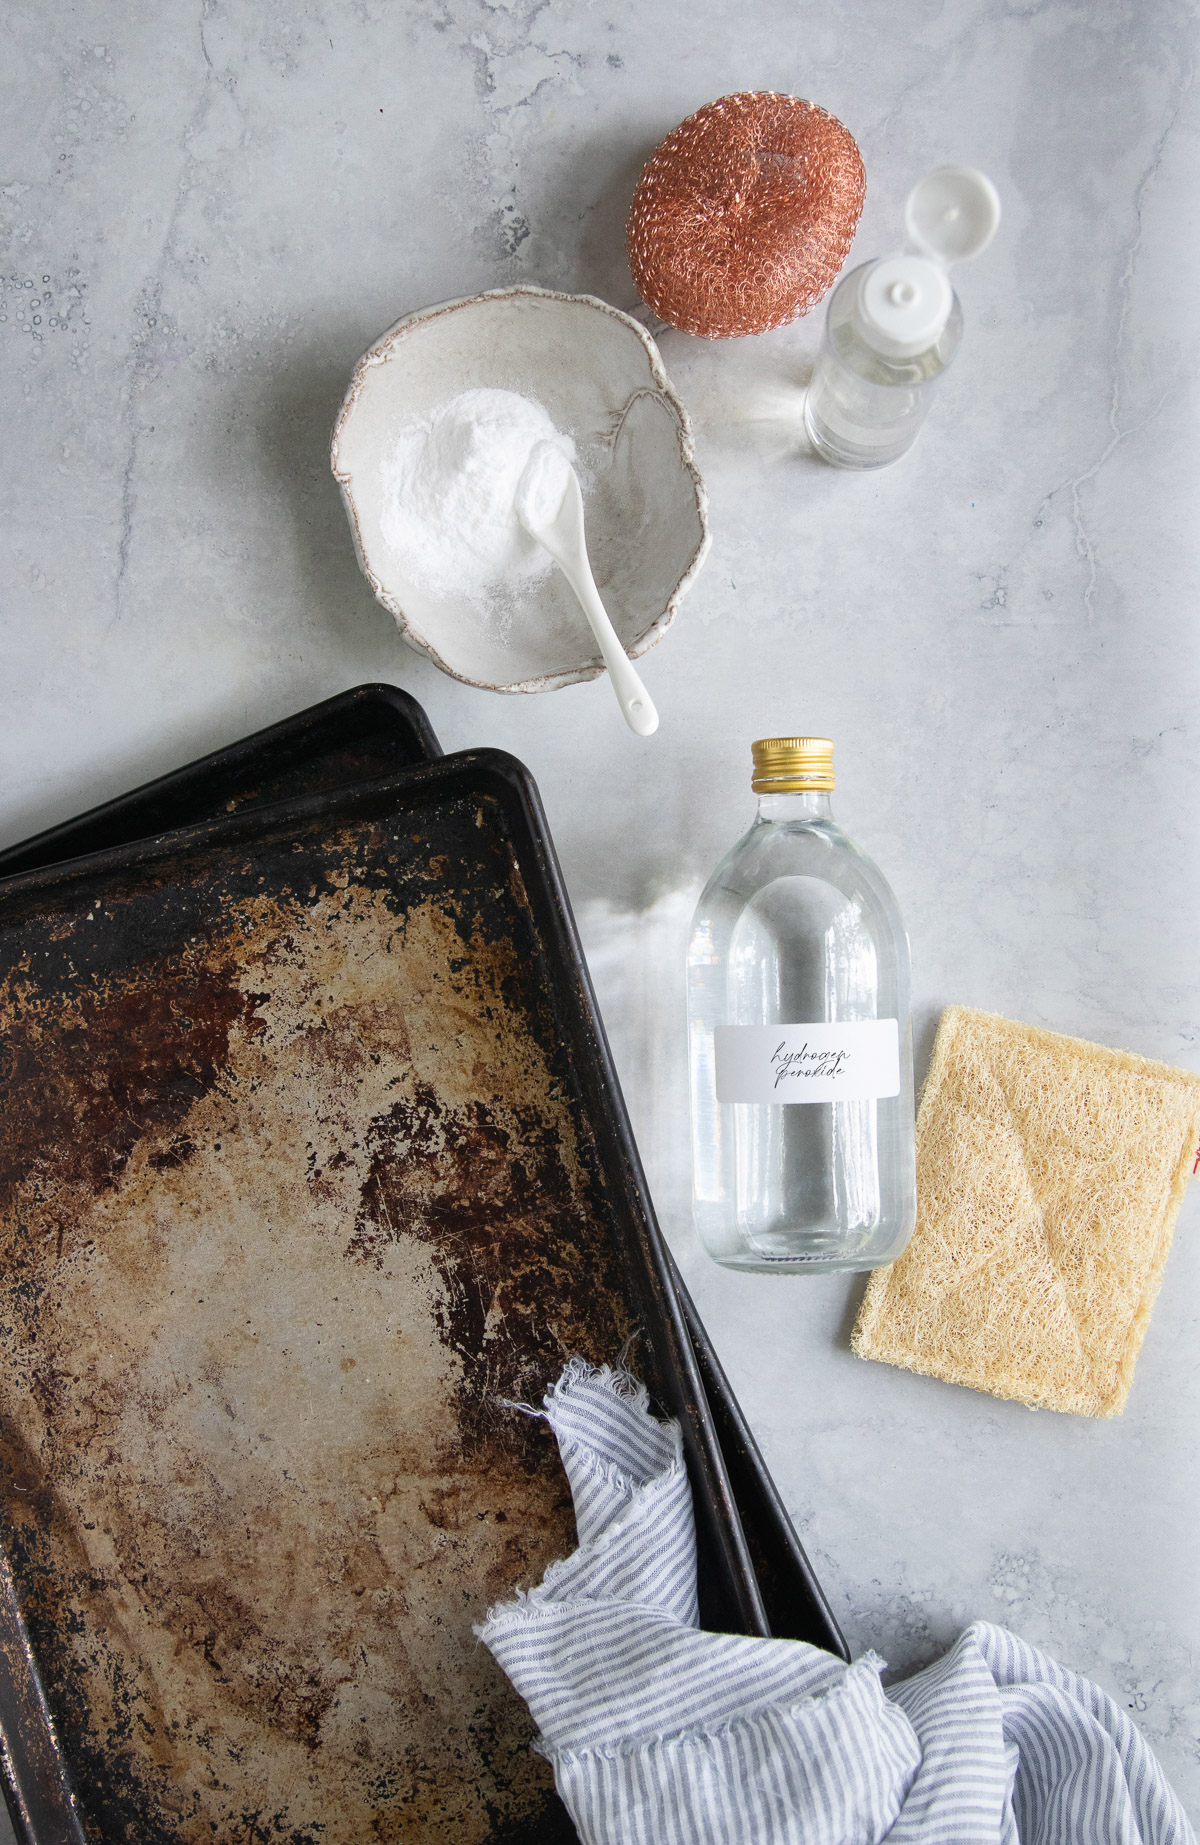 Green cleaning uses for baking soda